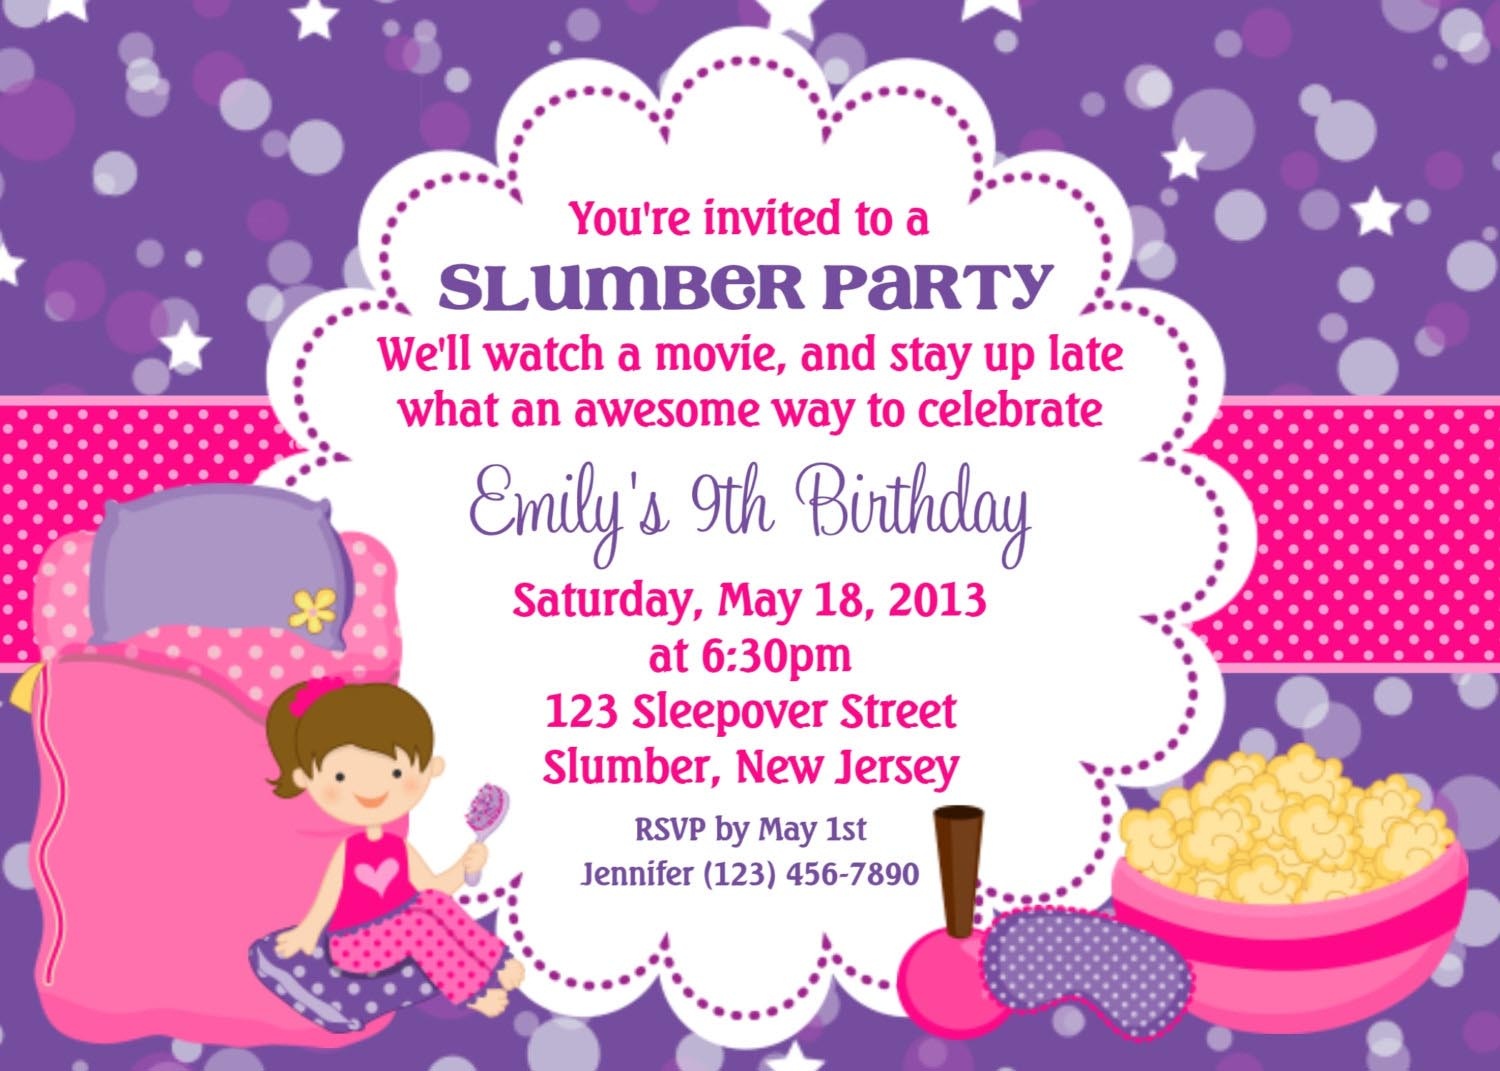 Spa Party Invitations Templates Free | Home Party Ideas - Free Printable Spa Party Invitations Templates